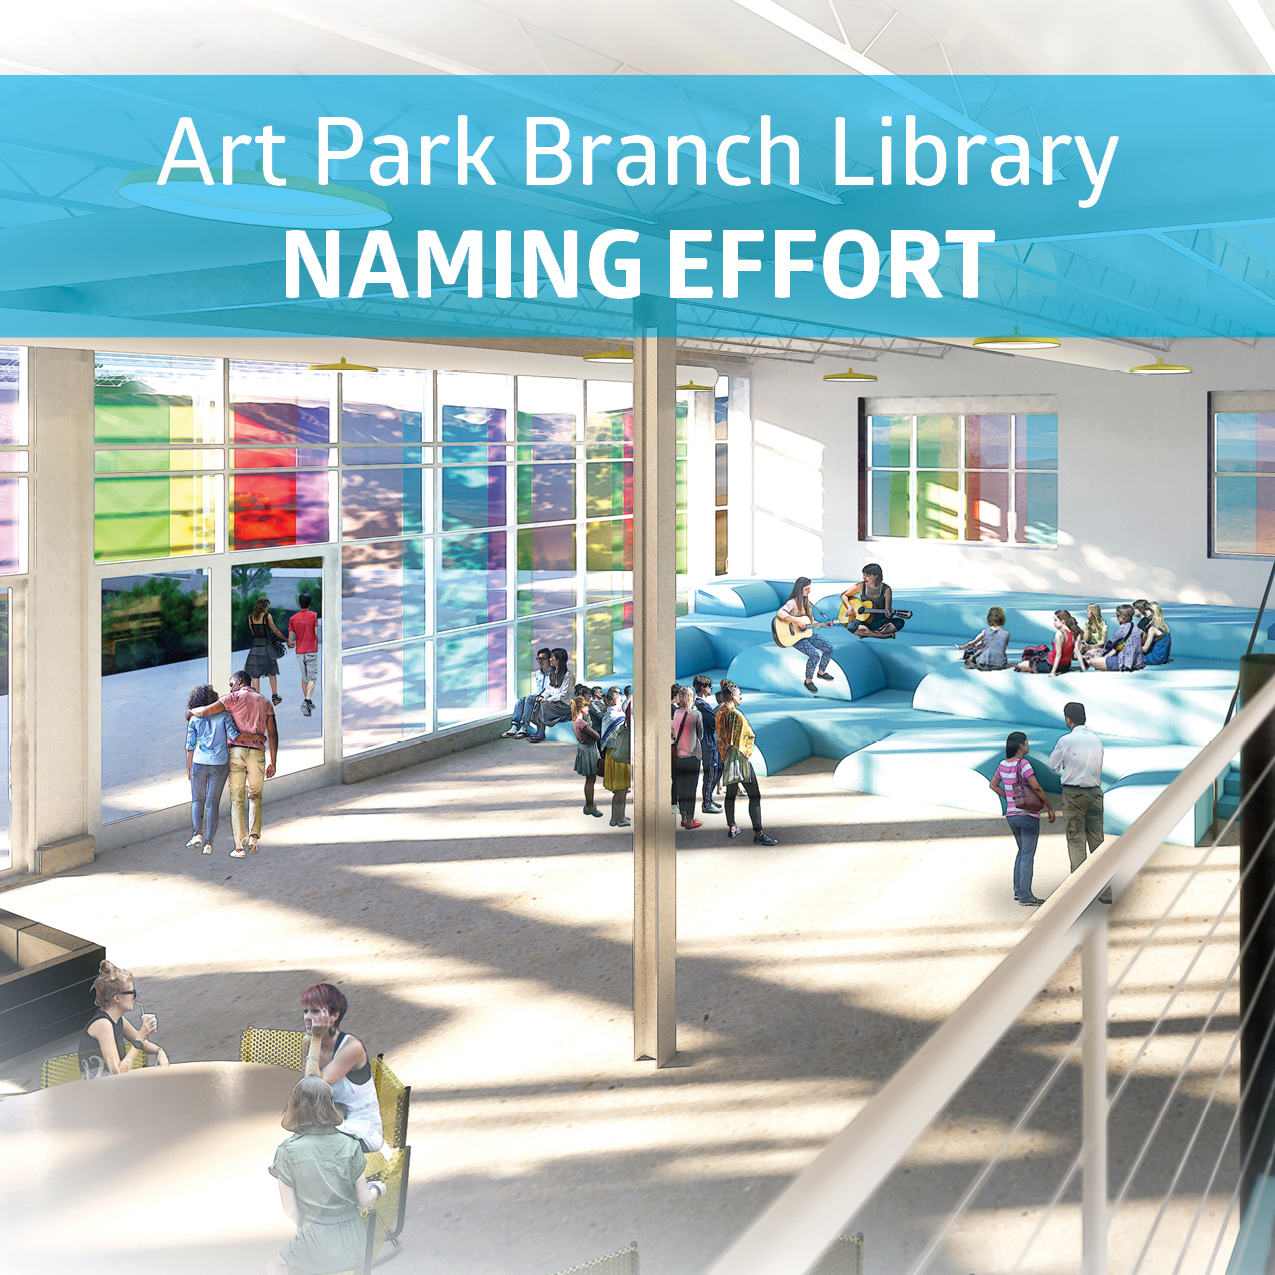 Digital rendering of ArtPark Branch Library. Main area of library with big colorful windows, sunlight shinning in, and people walking around. 